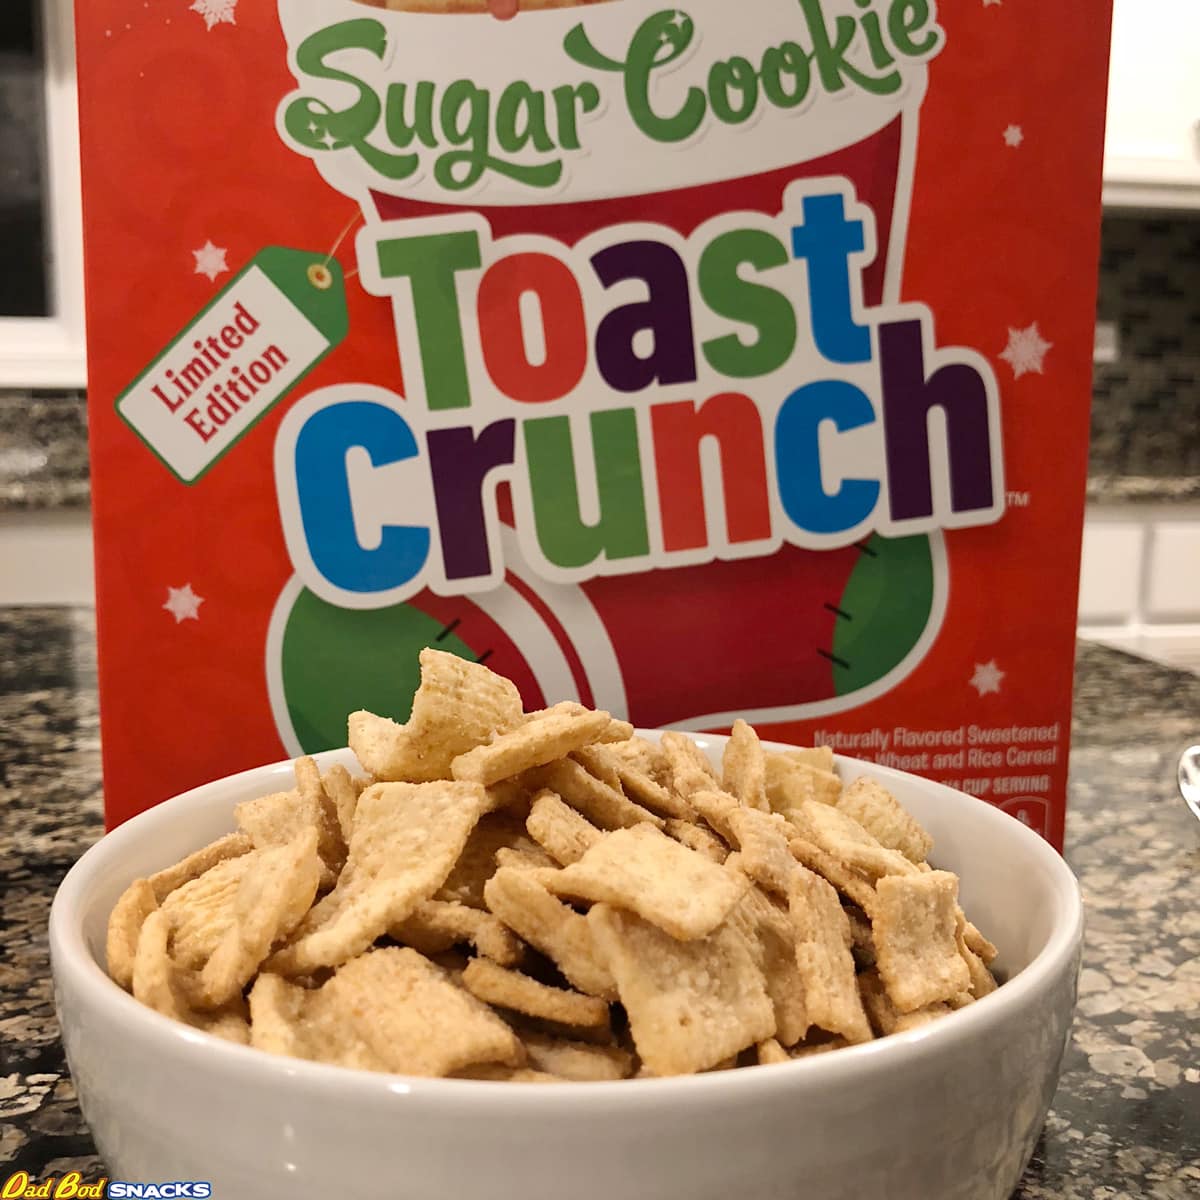 Sugar Cookie Toast Crunch Cereal in a bowl